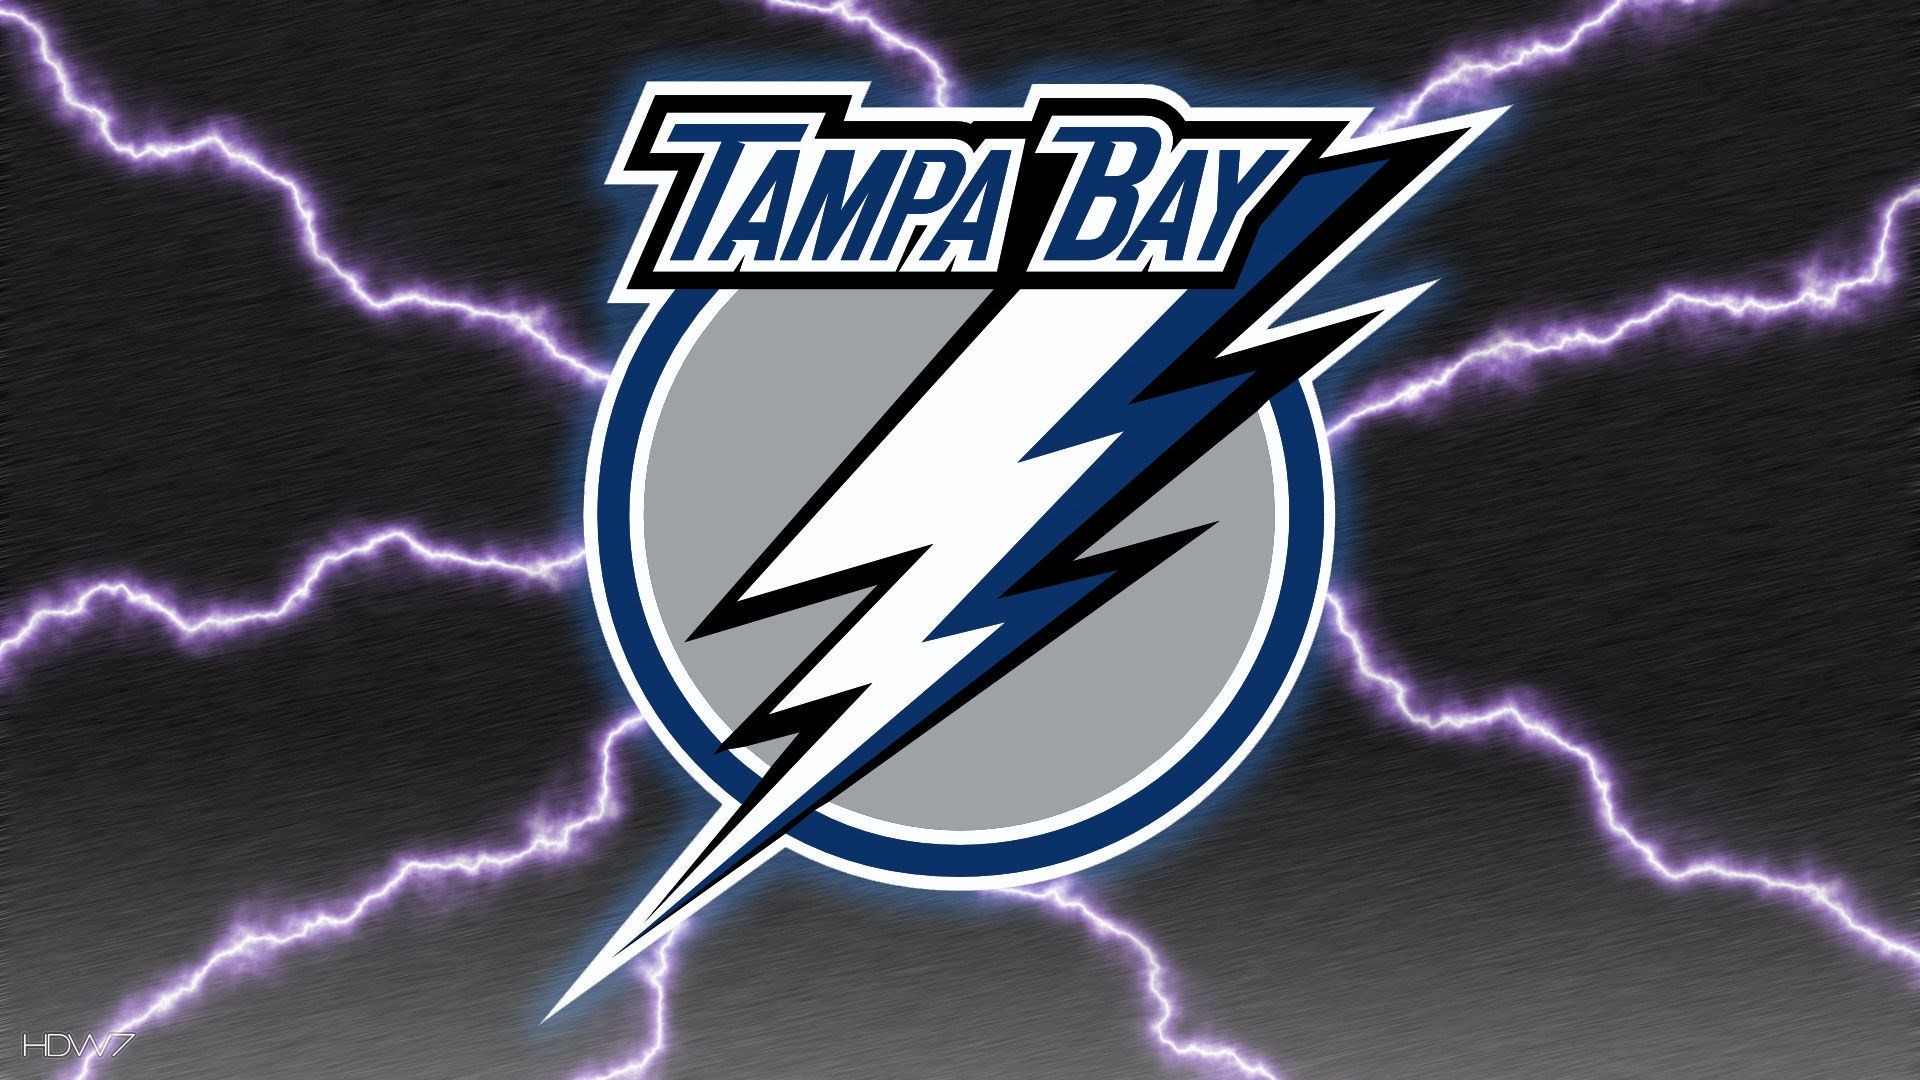 1920x1080 ... High Resolution Wallpapers Tampa Bay Rays wallpapers